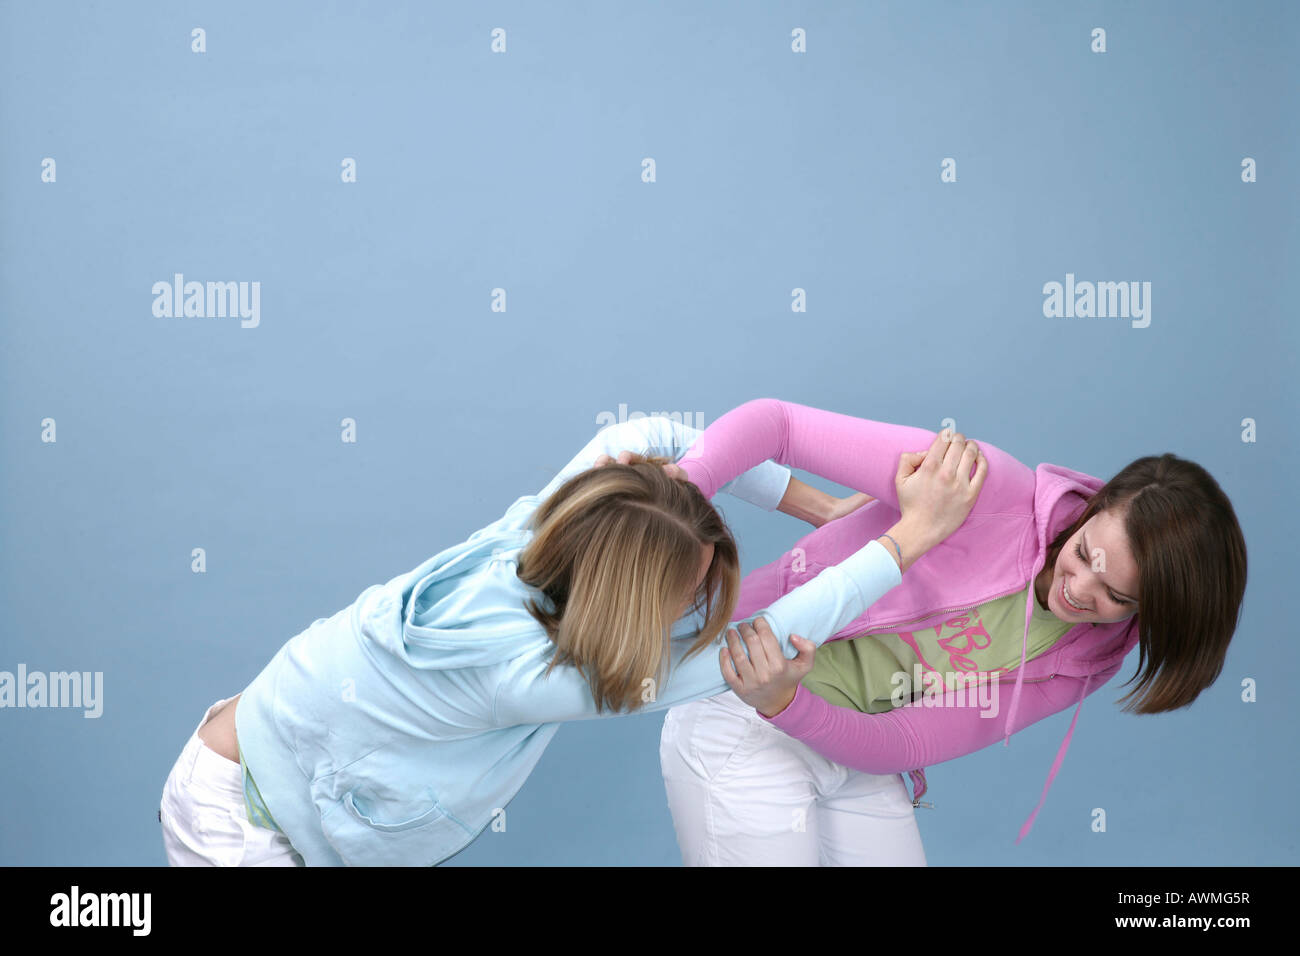 Two girls wearing casual outfits romping around in front of a light blue backdrop Stock Photo